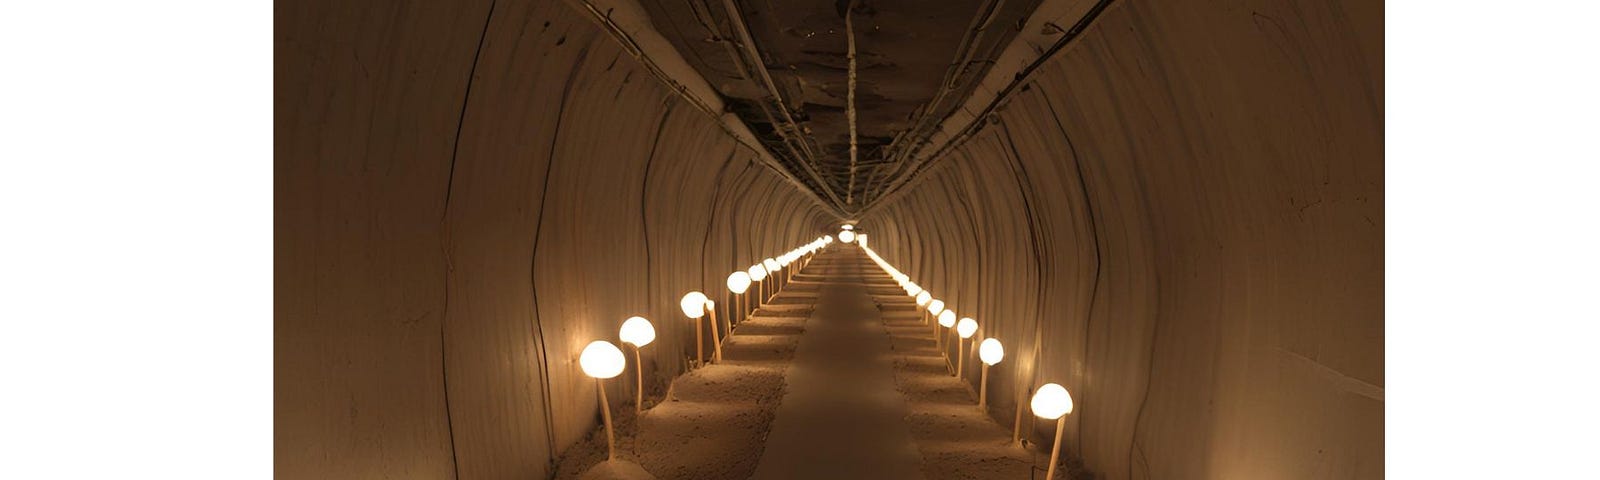 An abandoned underground subway tunnel, lined with small lights every 50 feet, stretching into the distance.